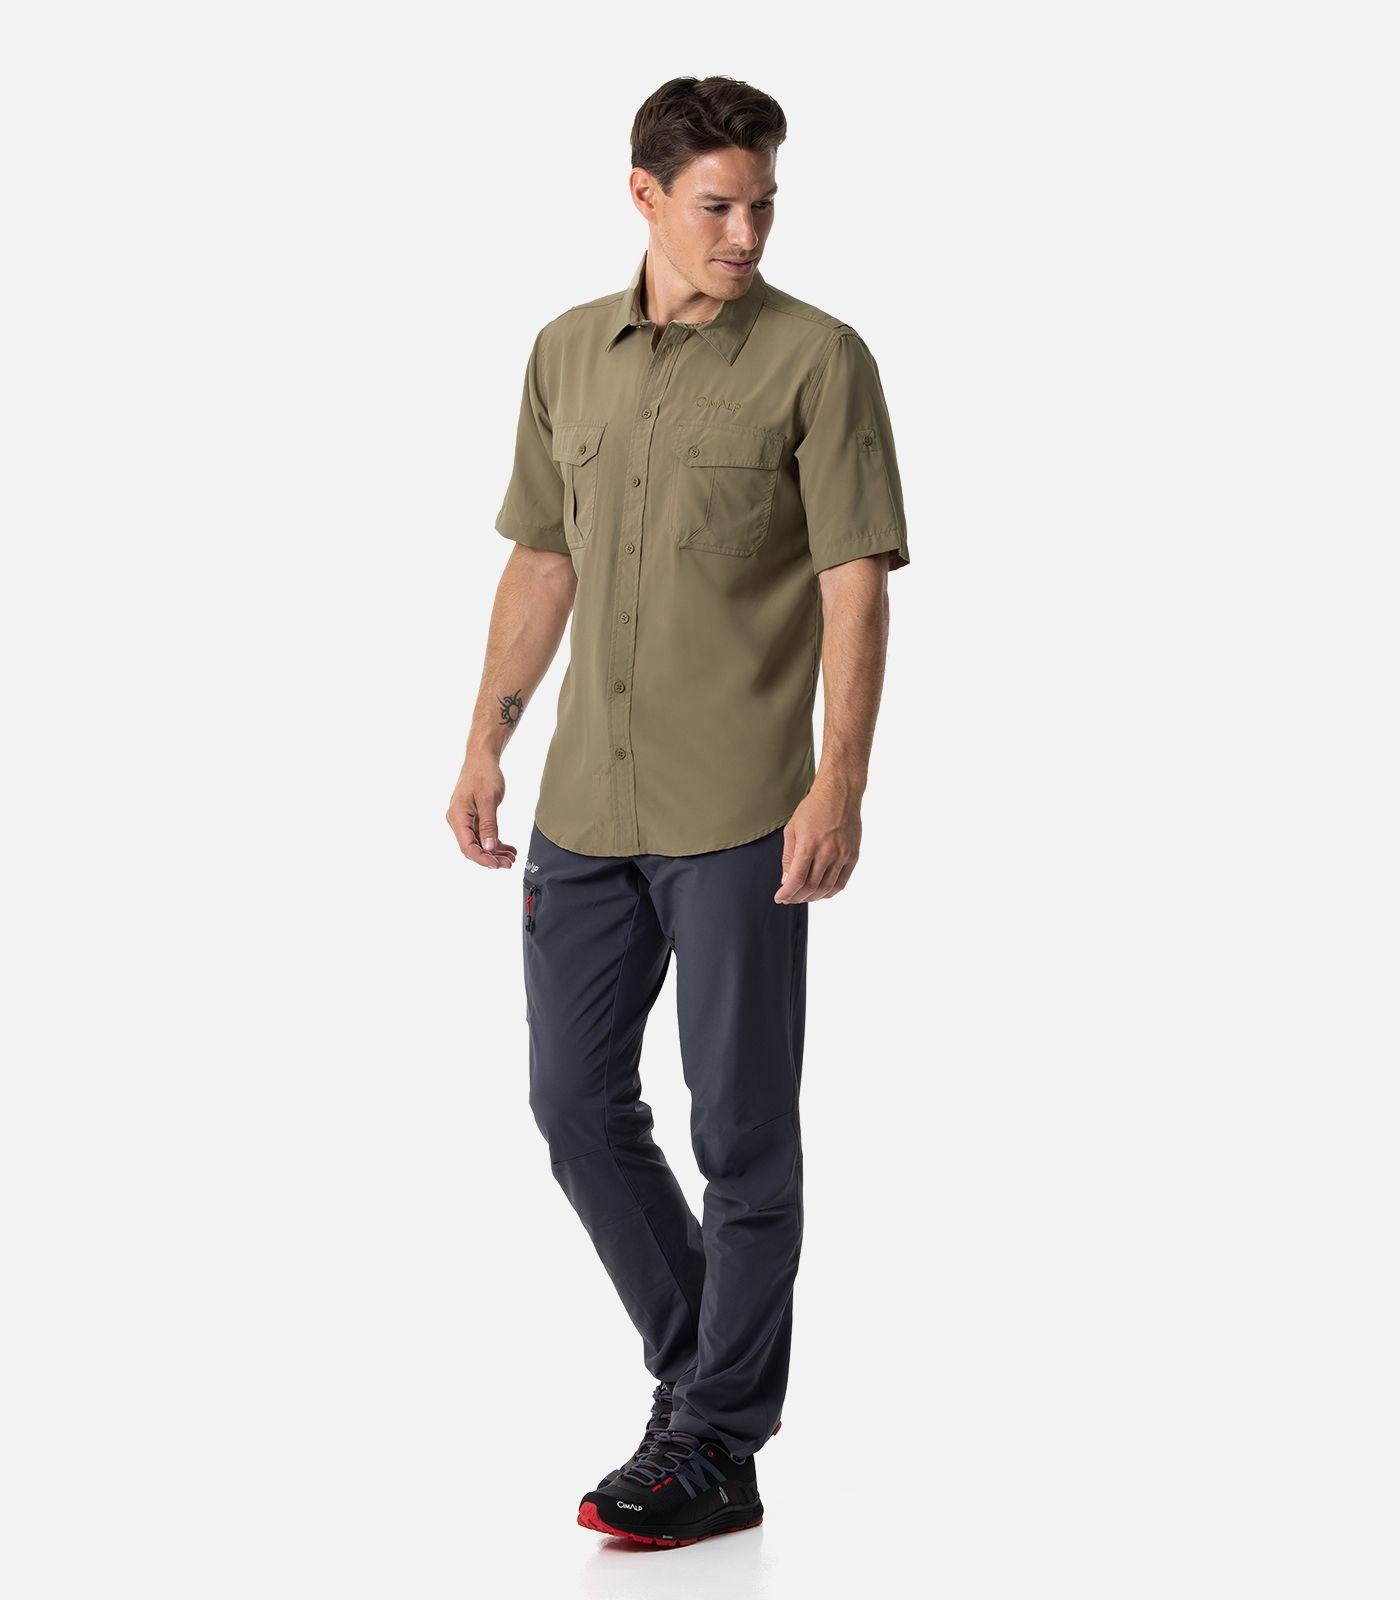 Hiking shirt with mosquito protection and UV protection